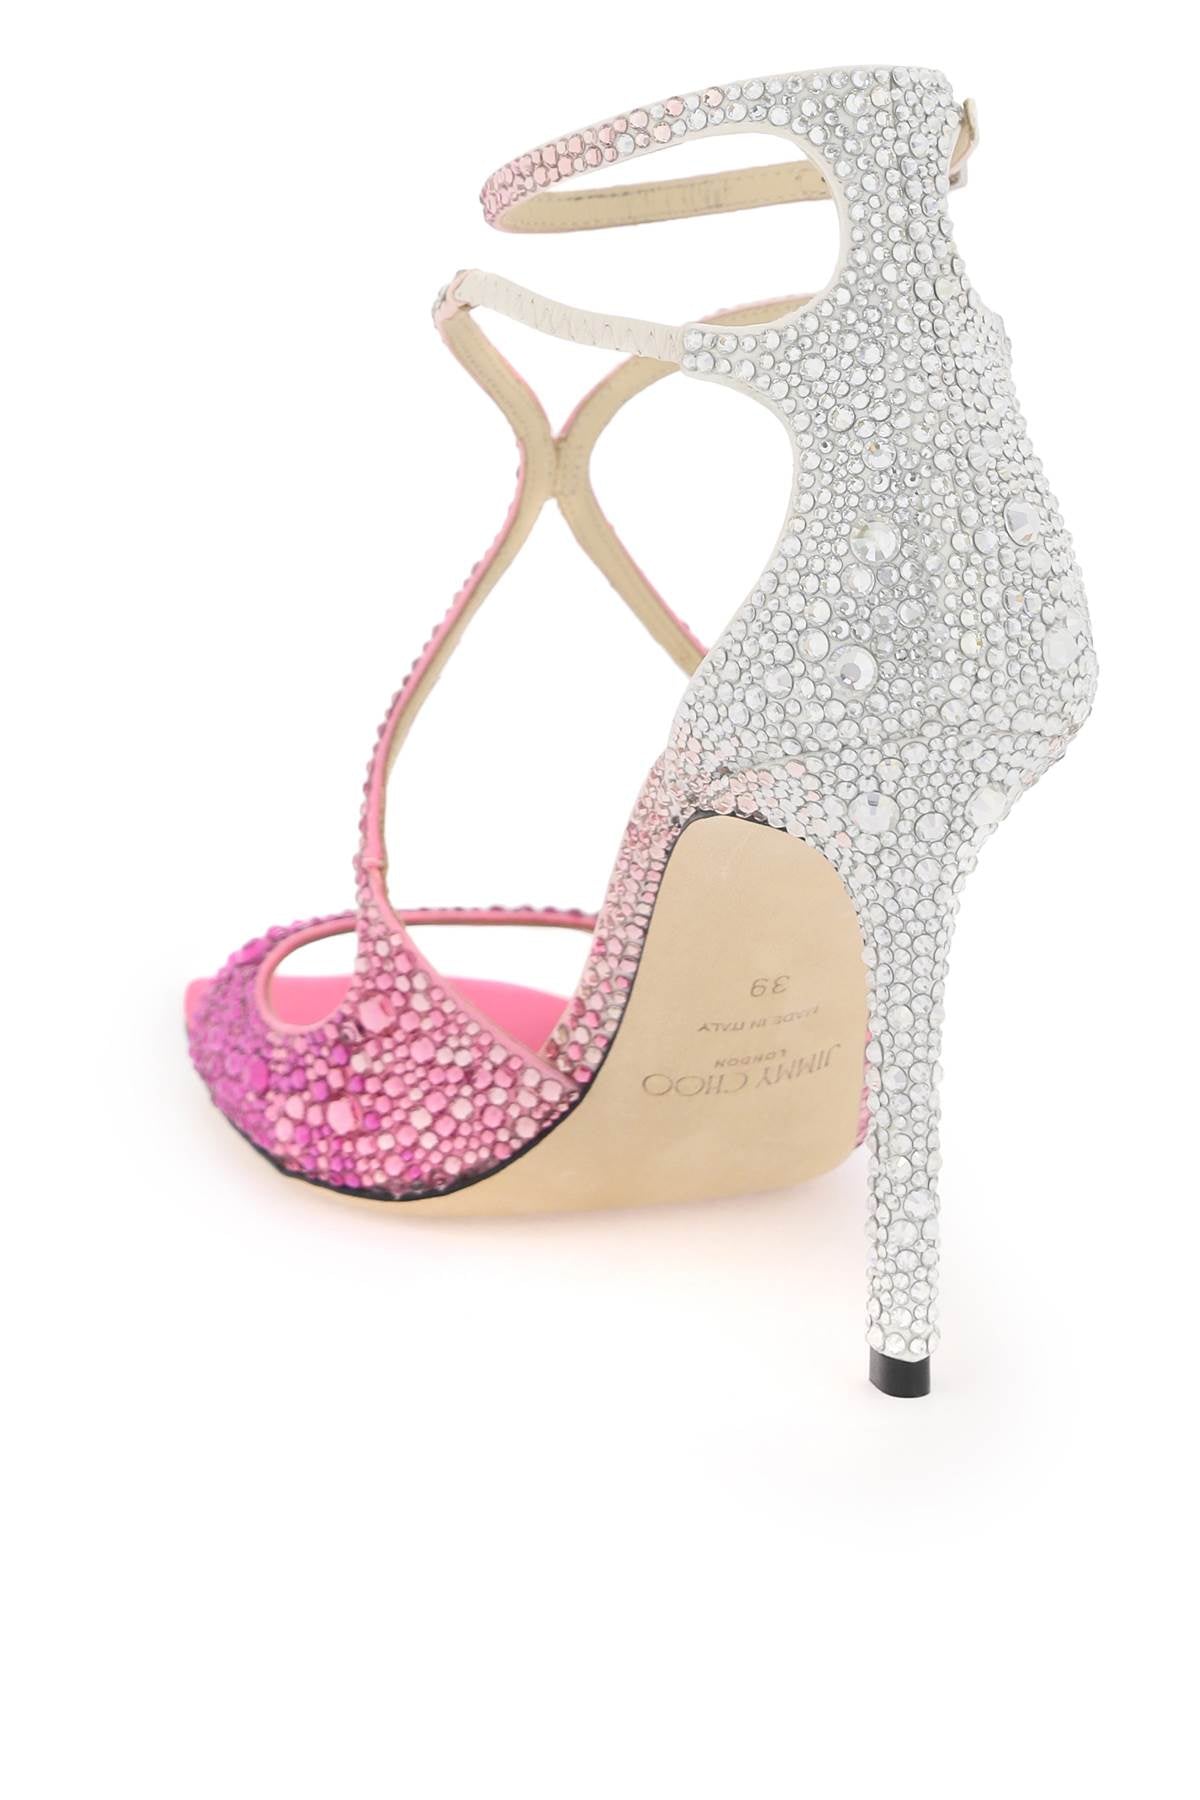 Jimmy choo azia 95 pumps with crystals-2